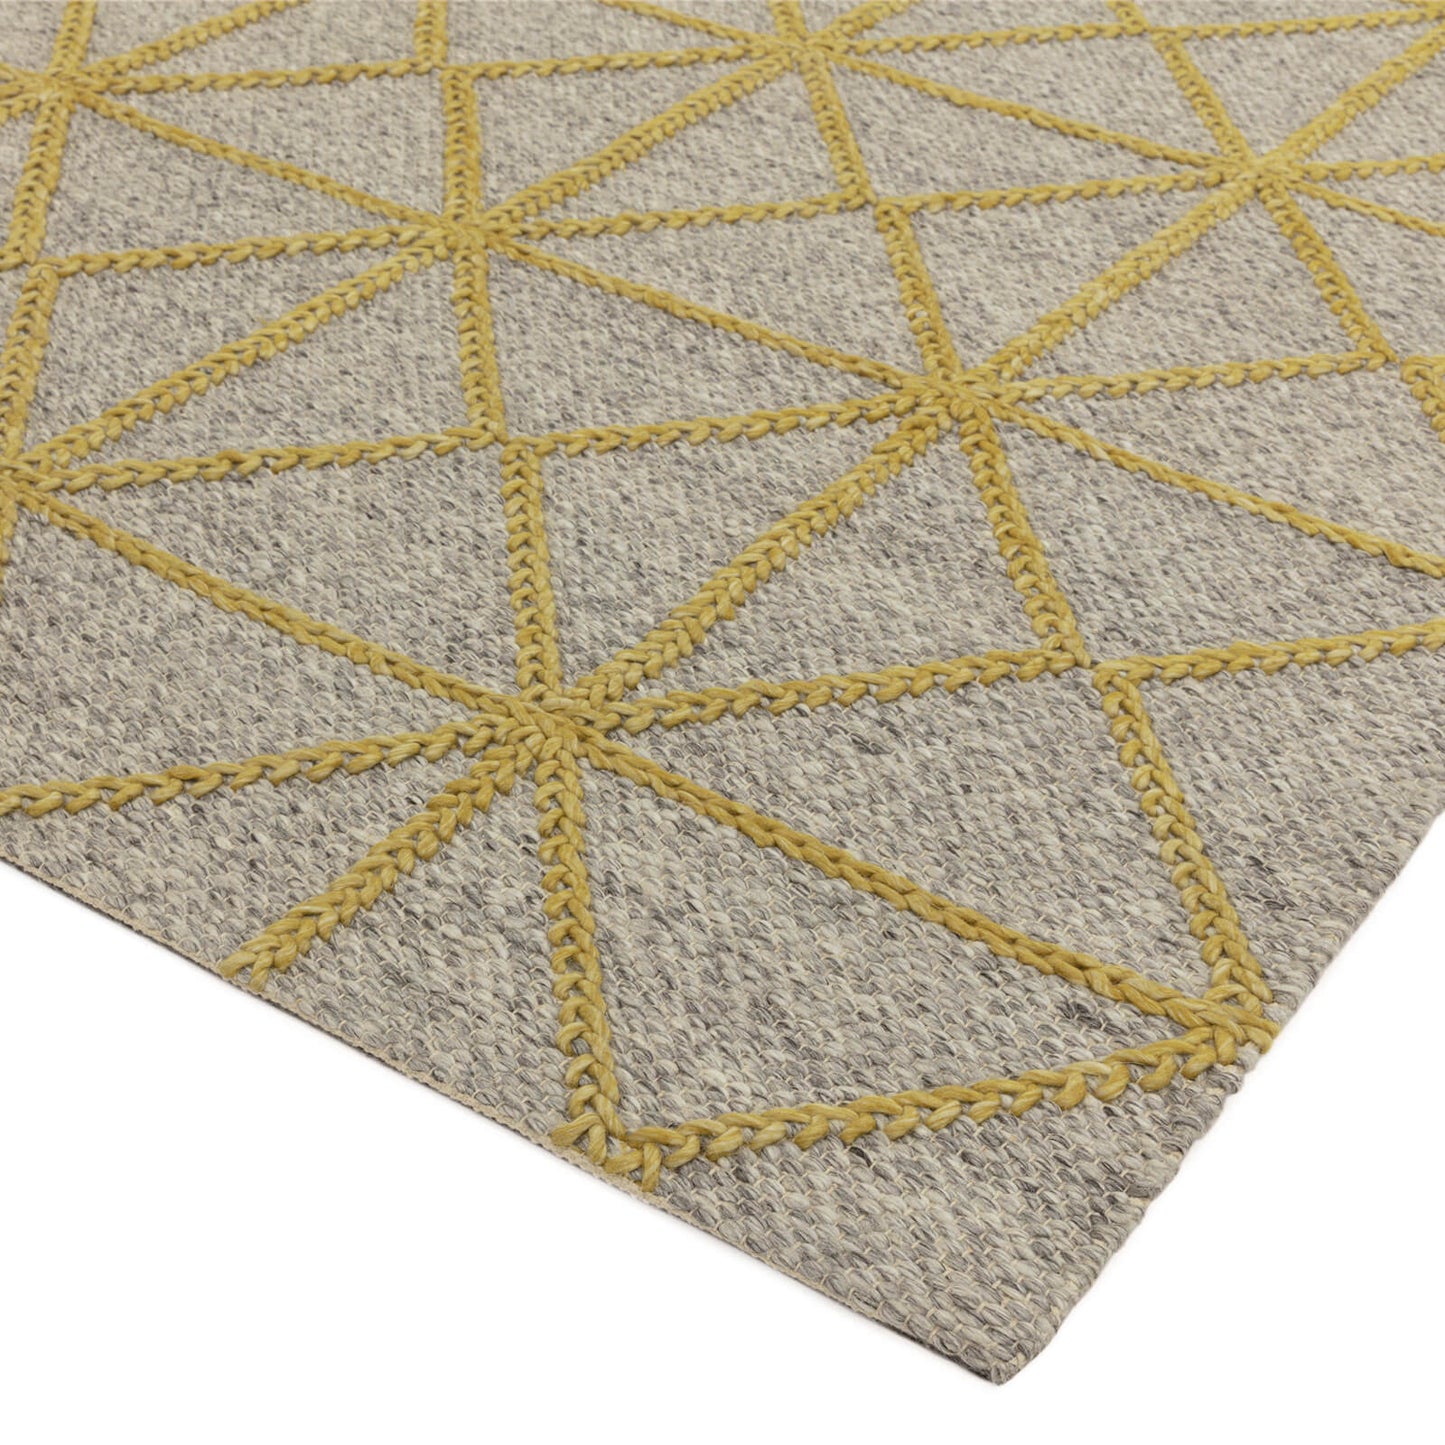 Asiatic Prism Yellow Rug